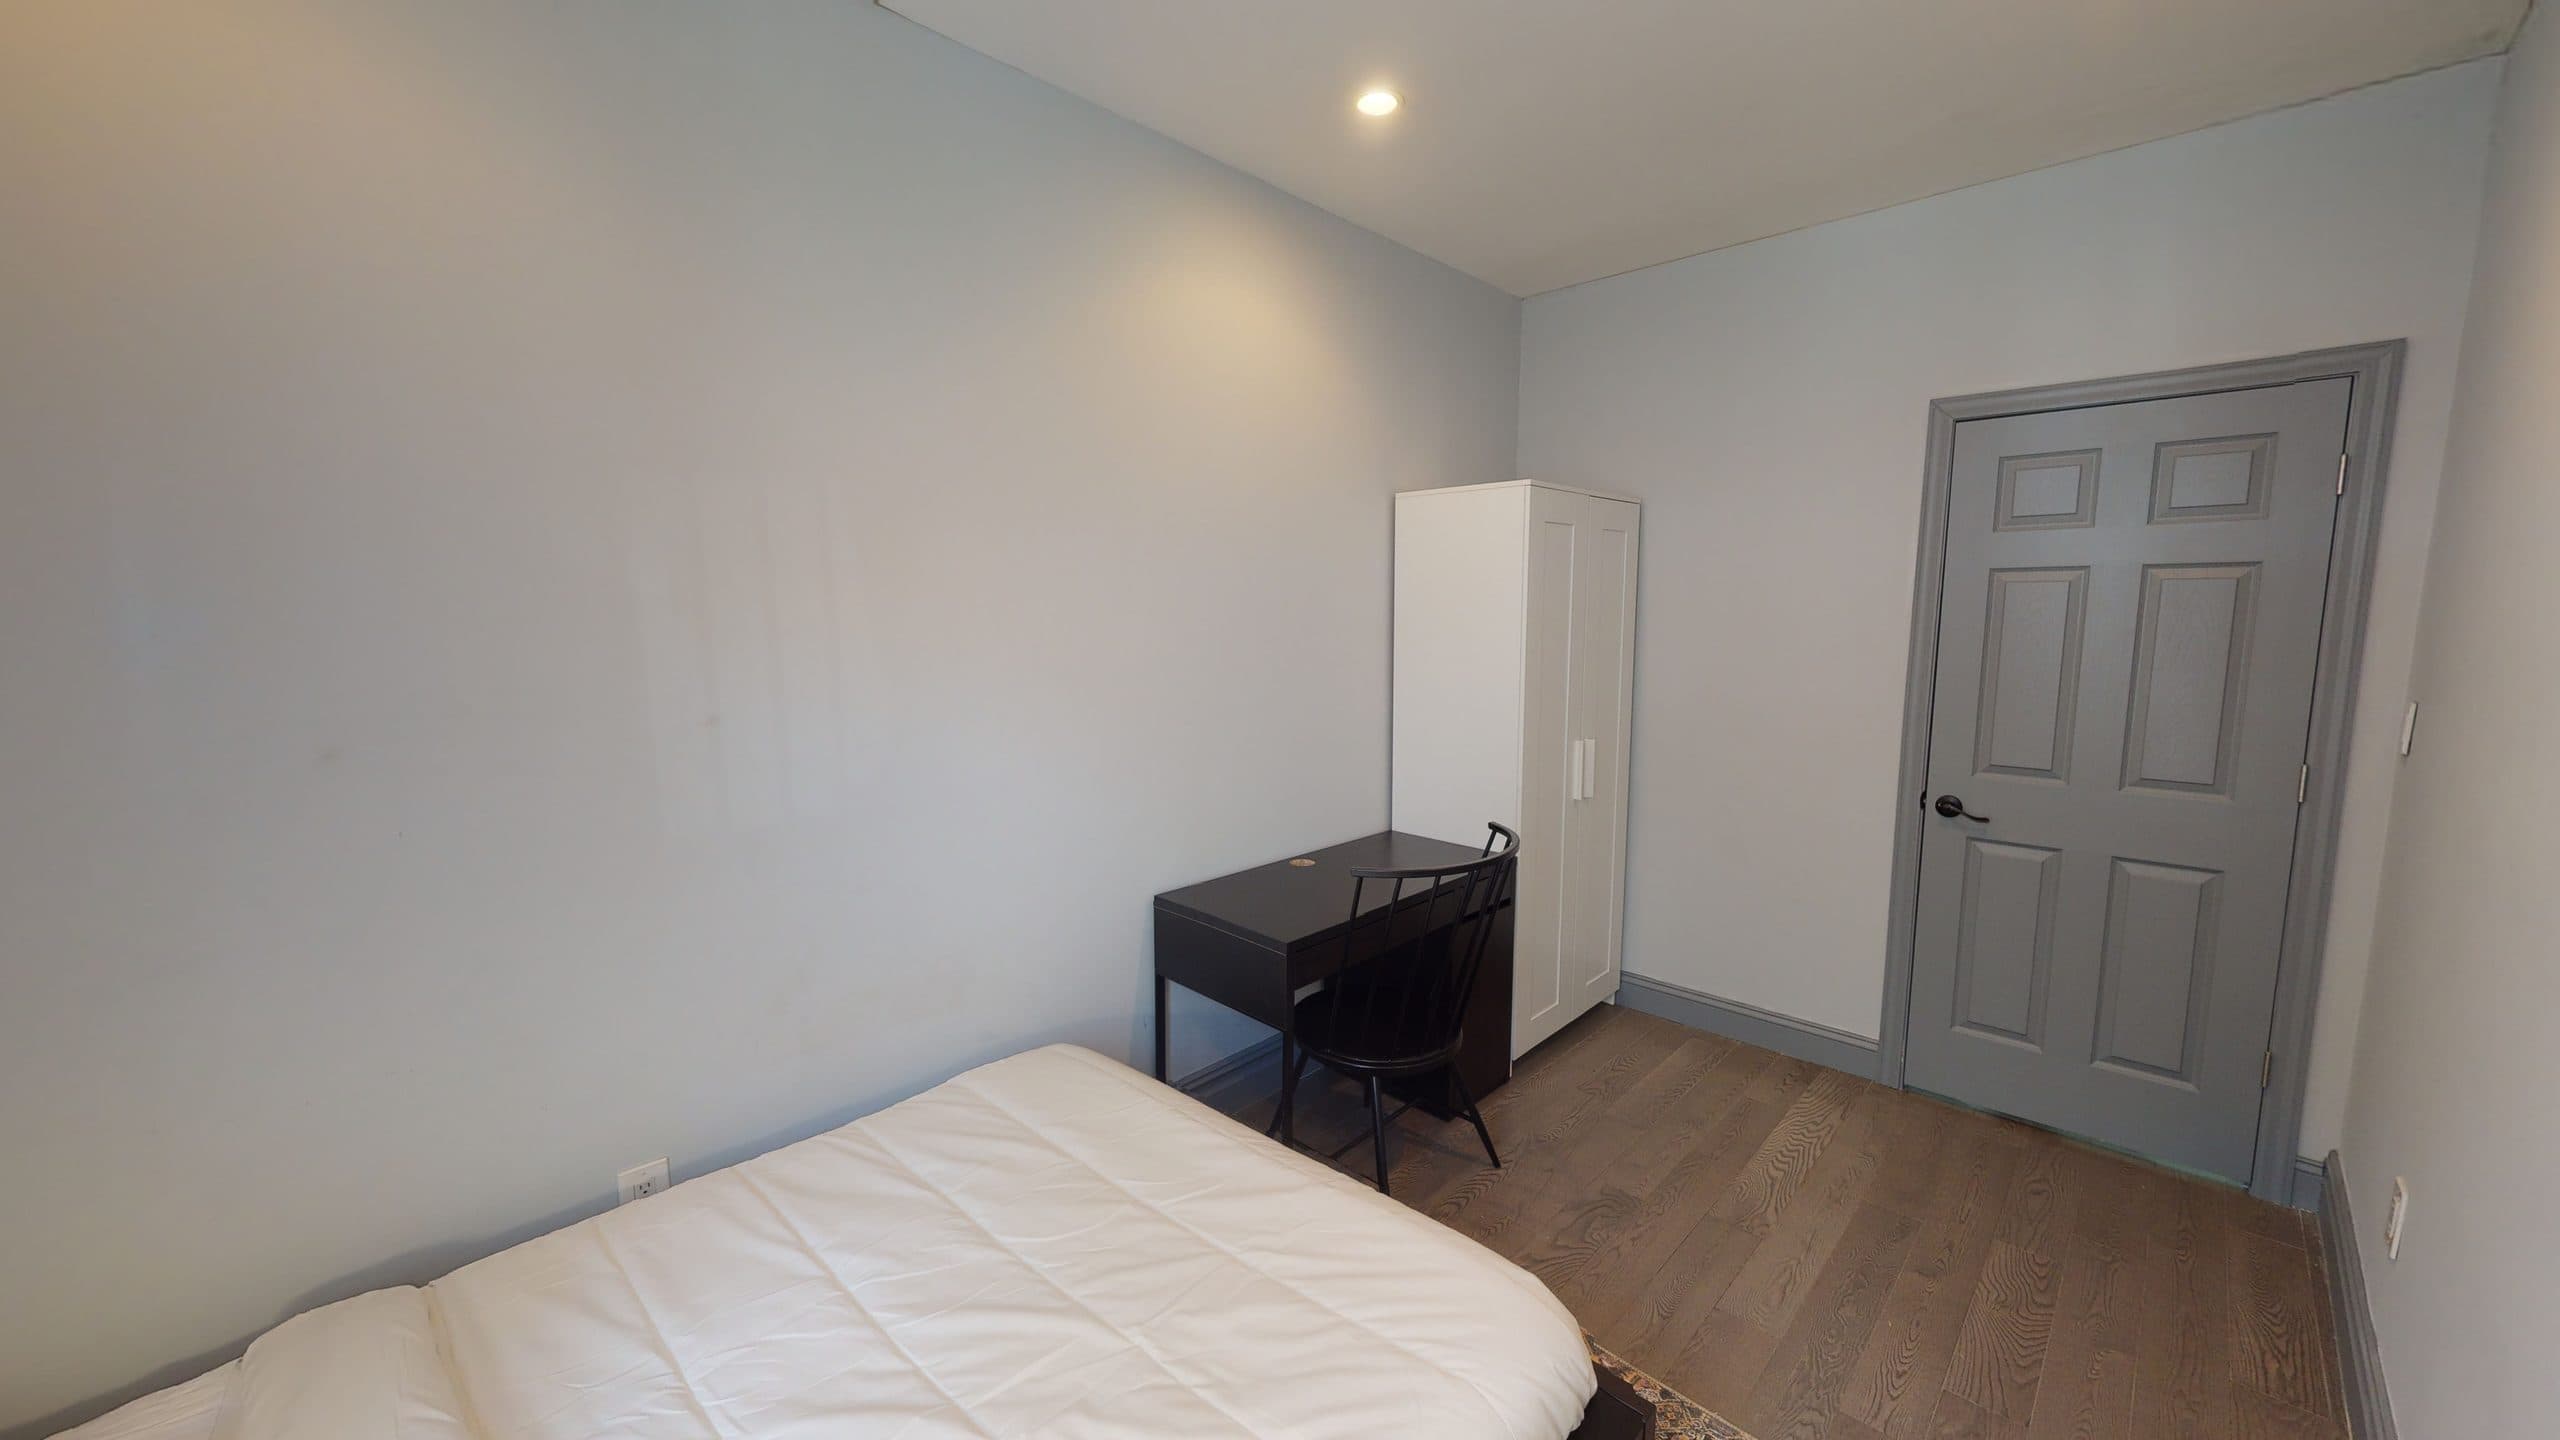 Photo 22 of #1566: Queen Bedroom A at June Homes